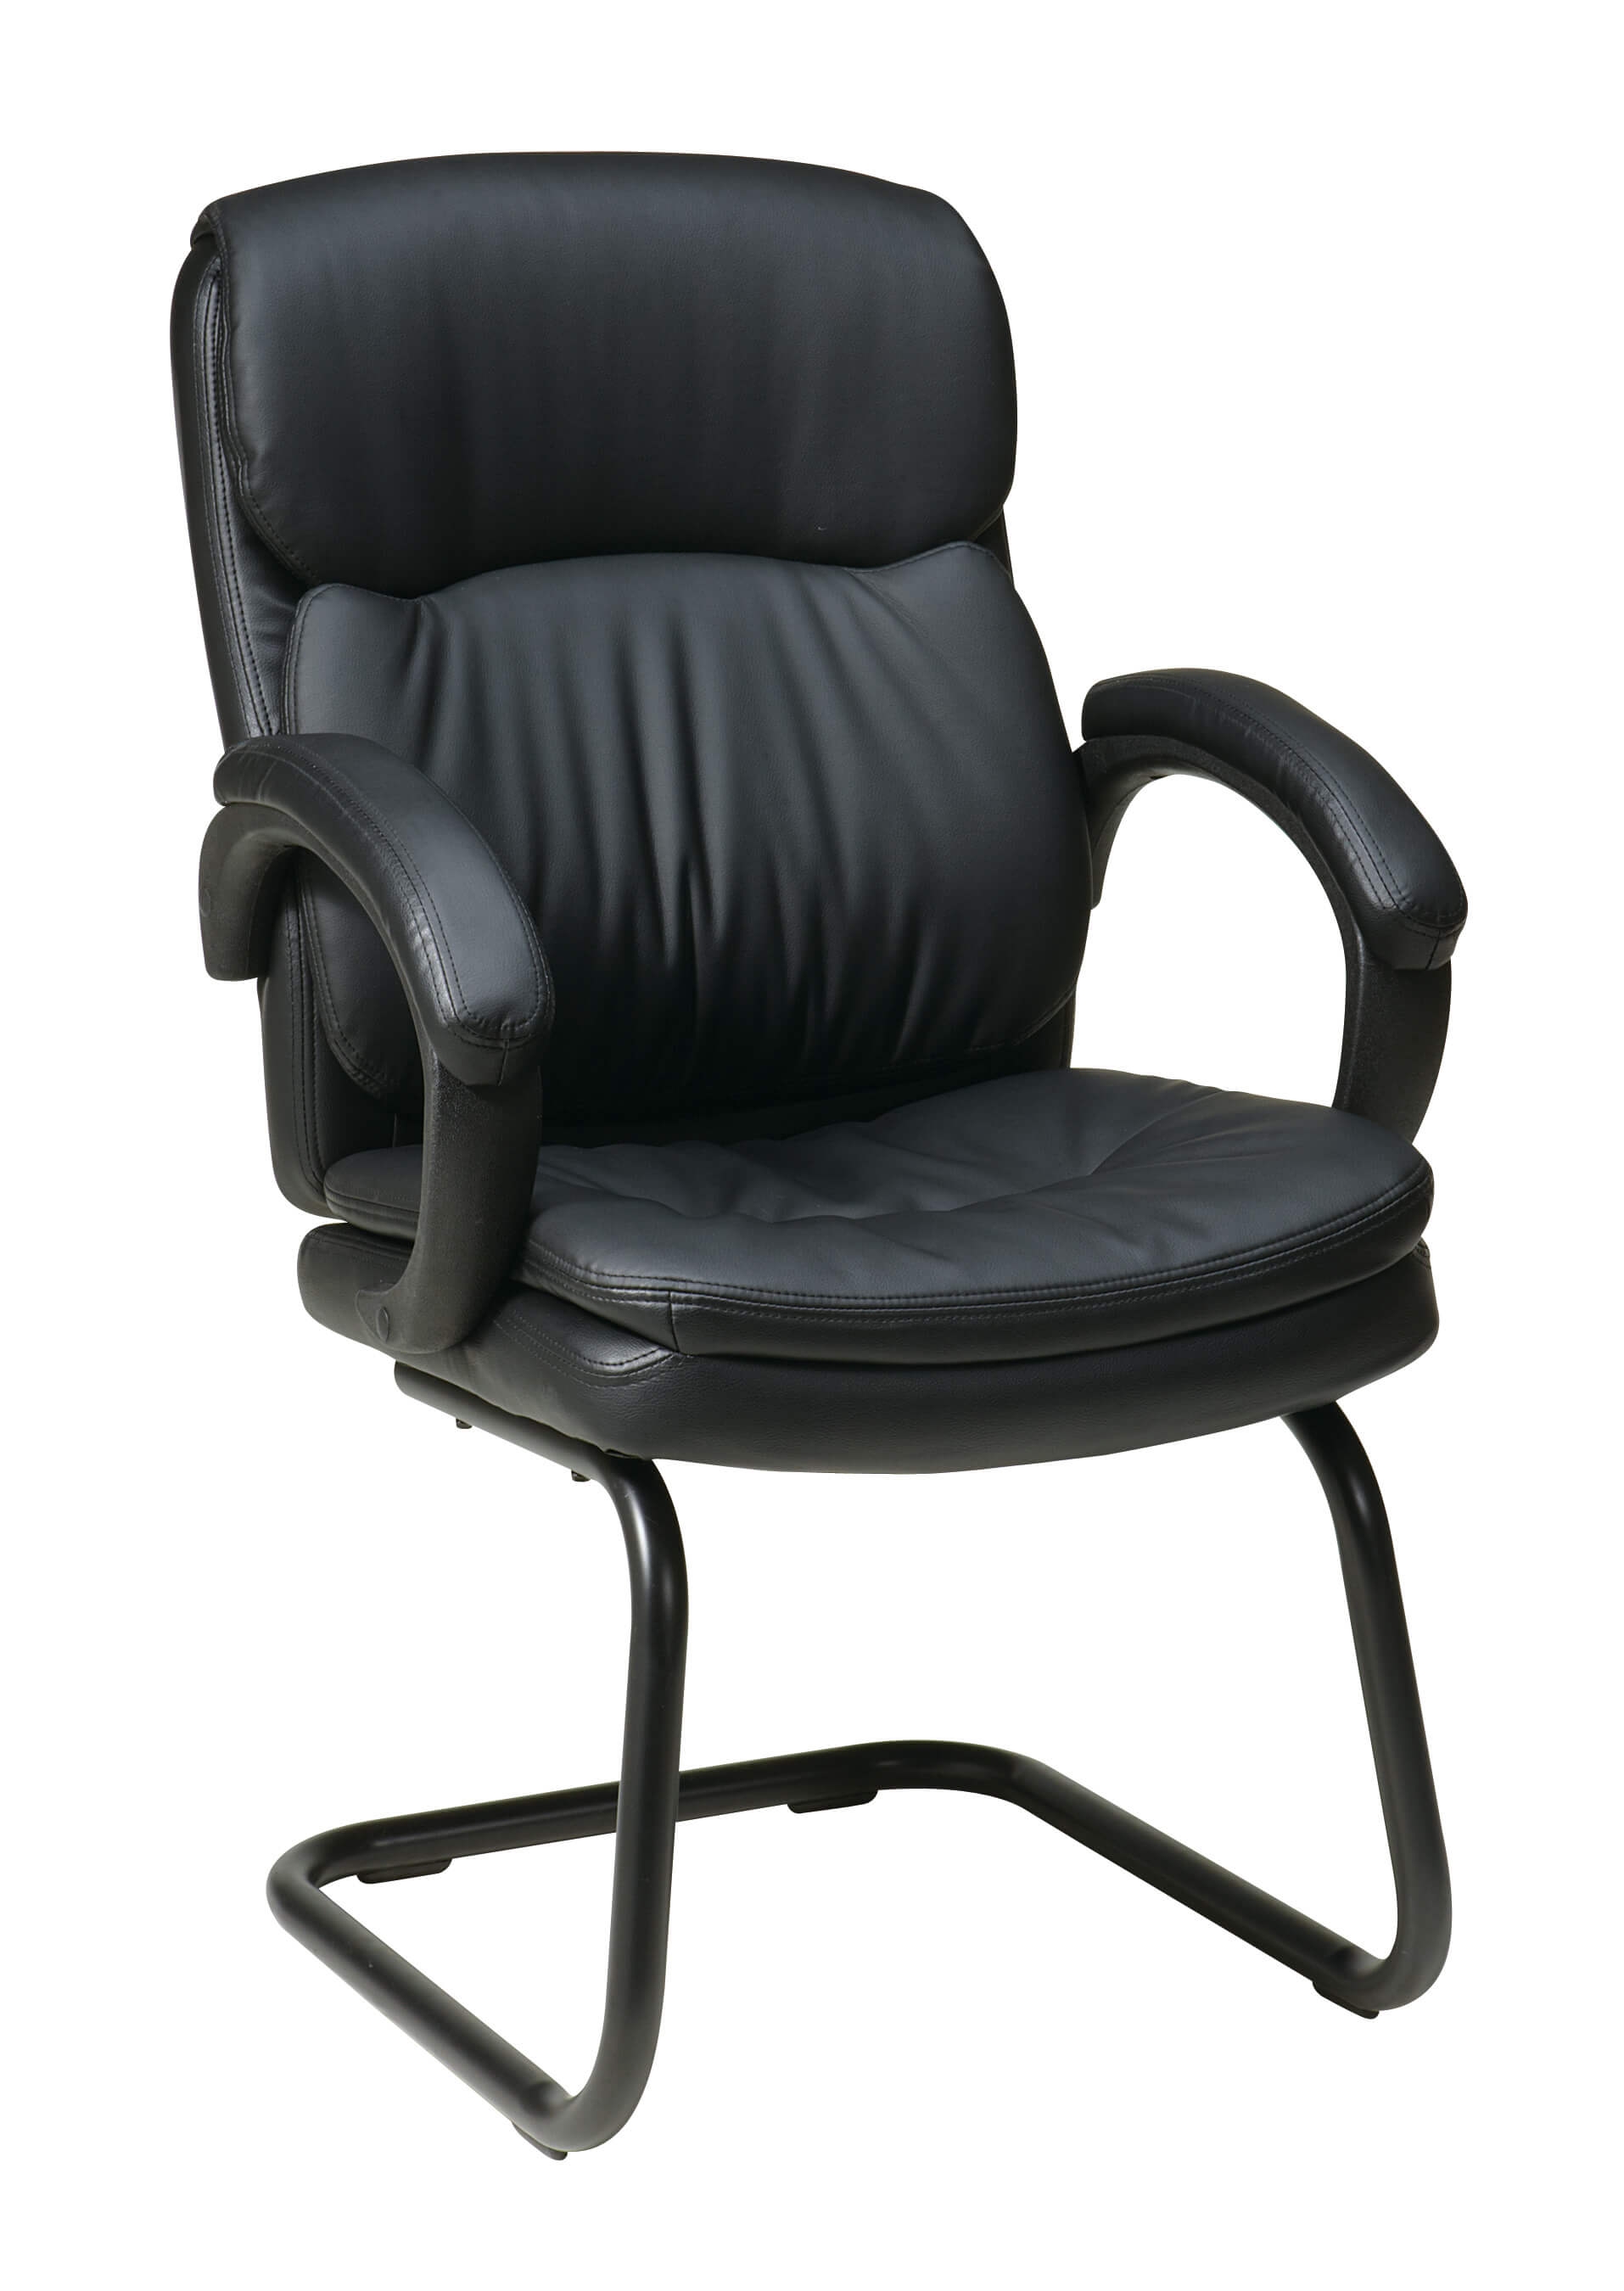 office-waiting-room-chairs-black-leather-office-chair.jpg